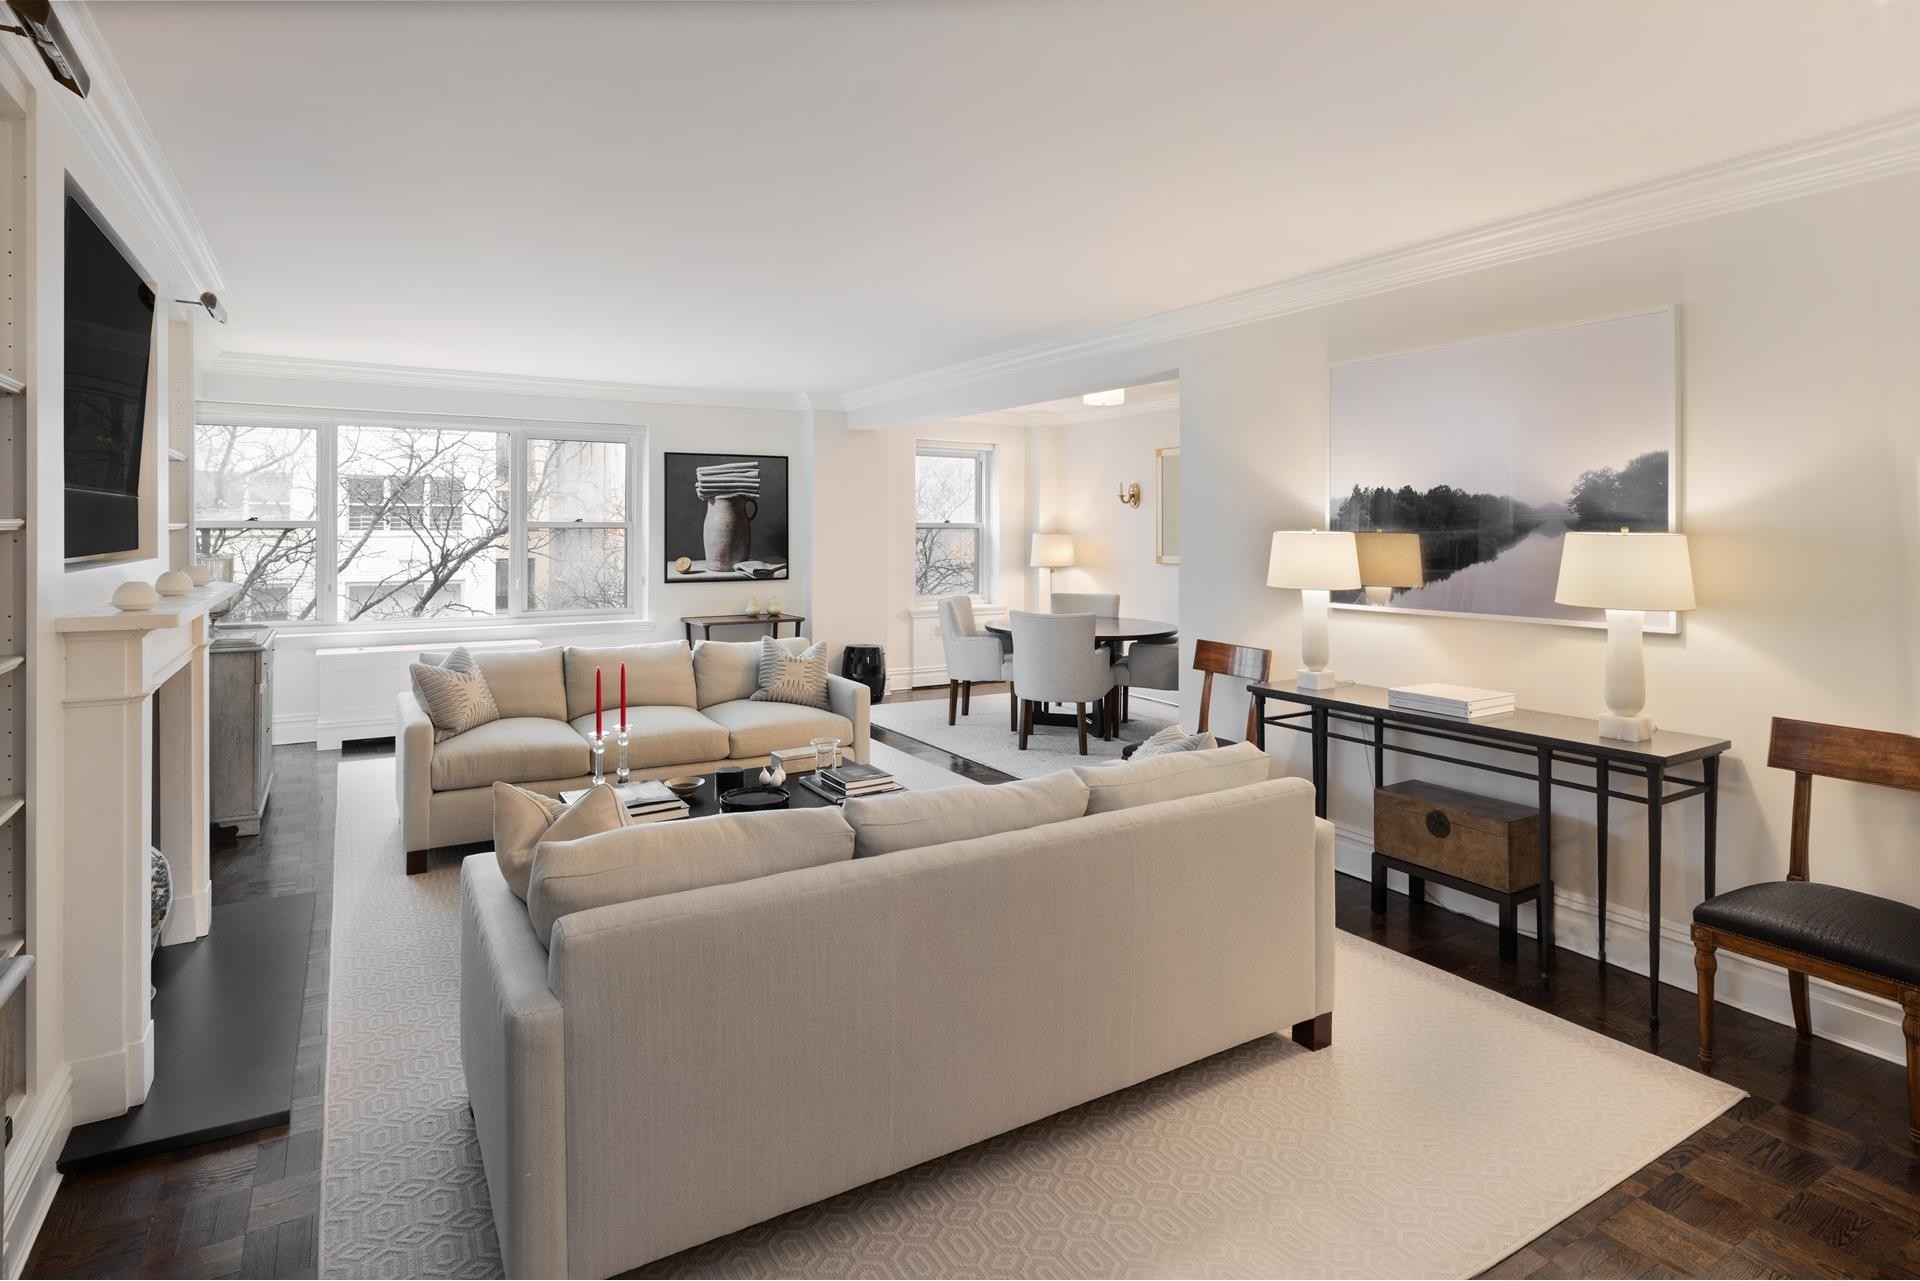 Co-op Properties for Sale at 1025 FIFTH AVE, 5DS Upper East Side, New York, NY 10028